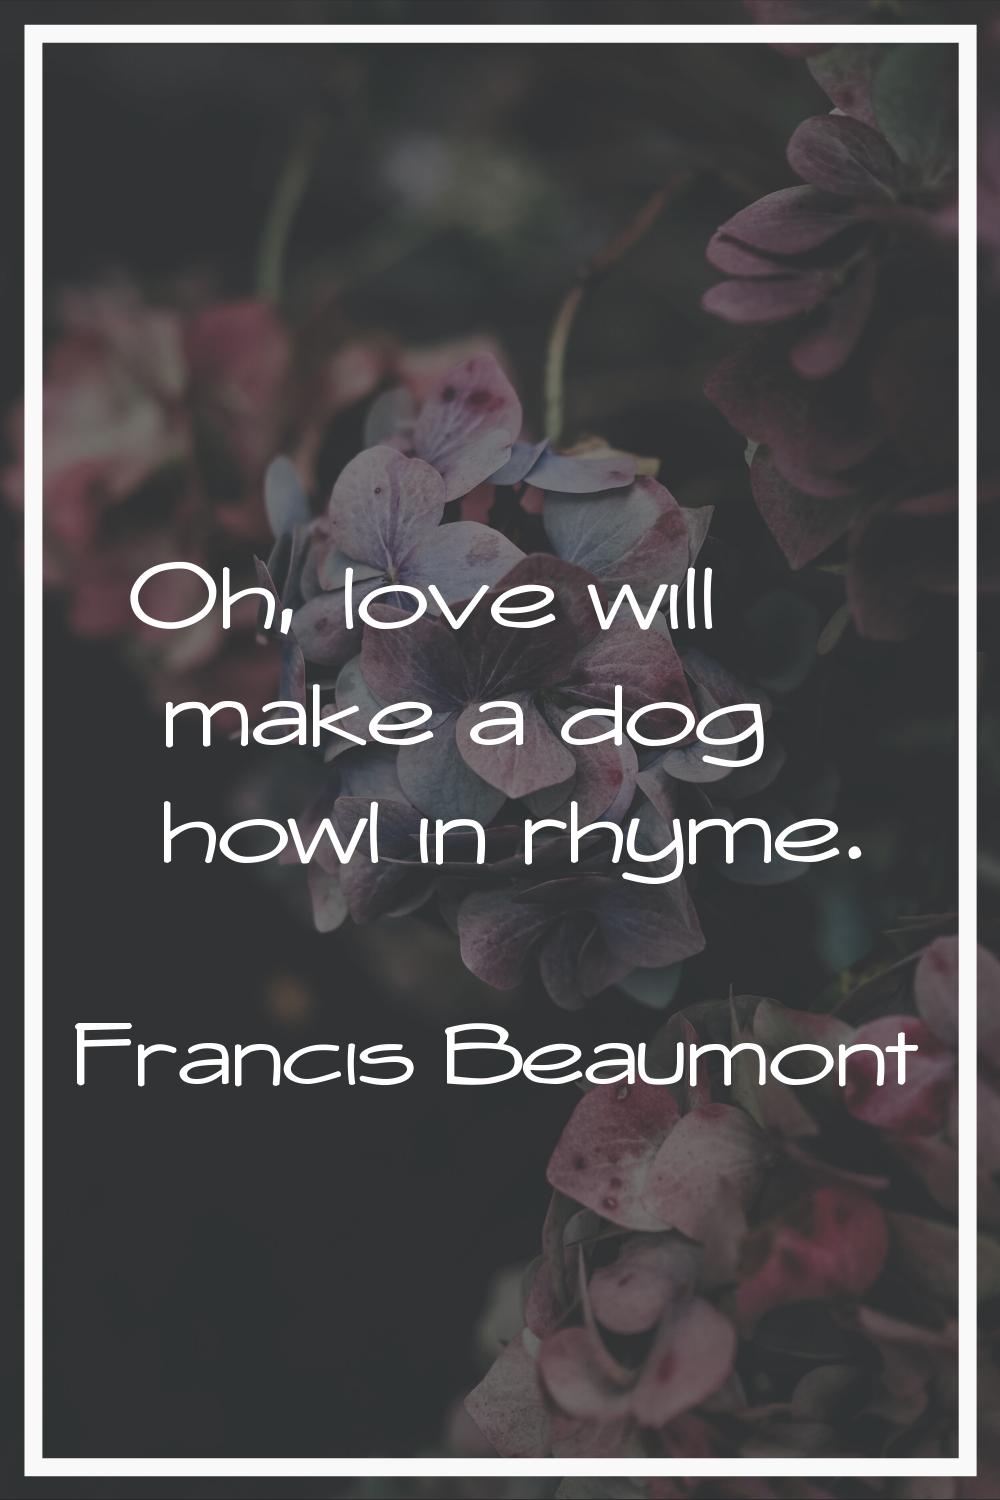 Oh, love will make a dog howl in rhyme.